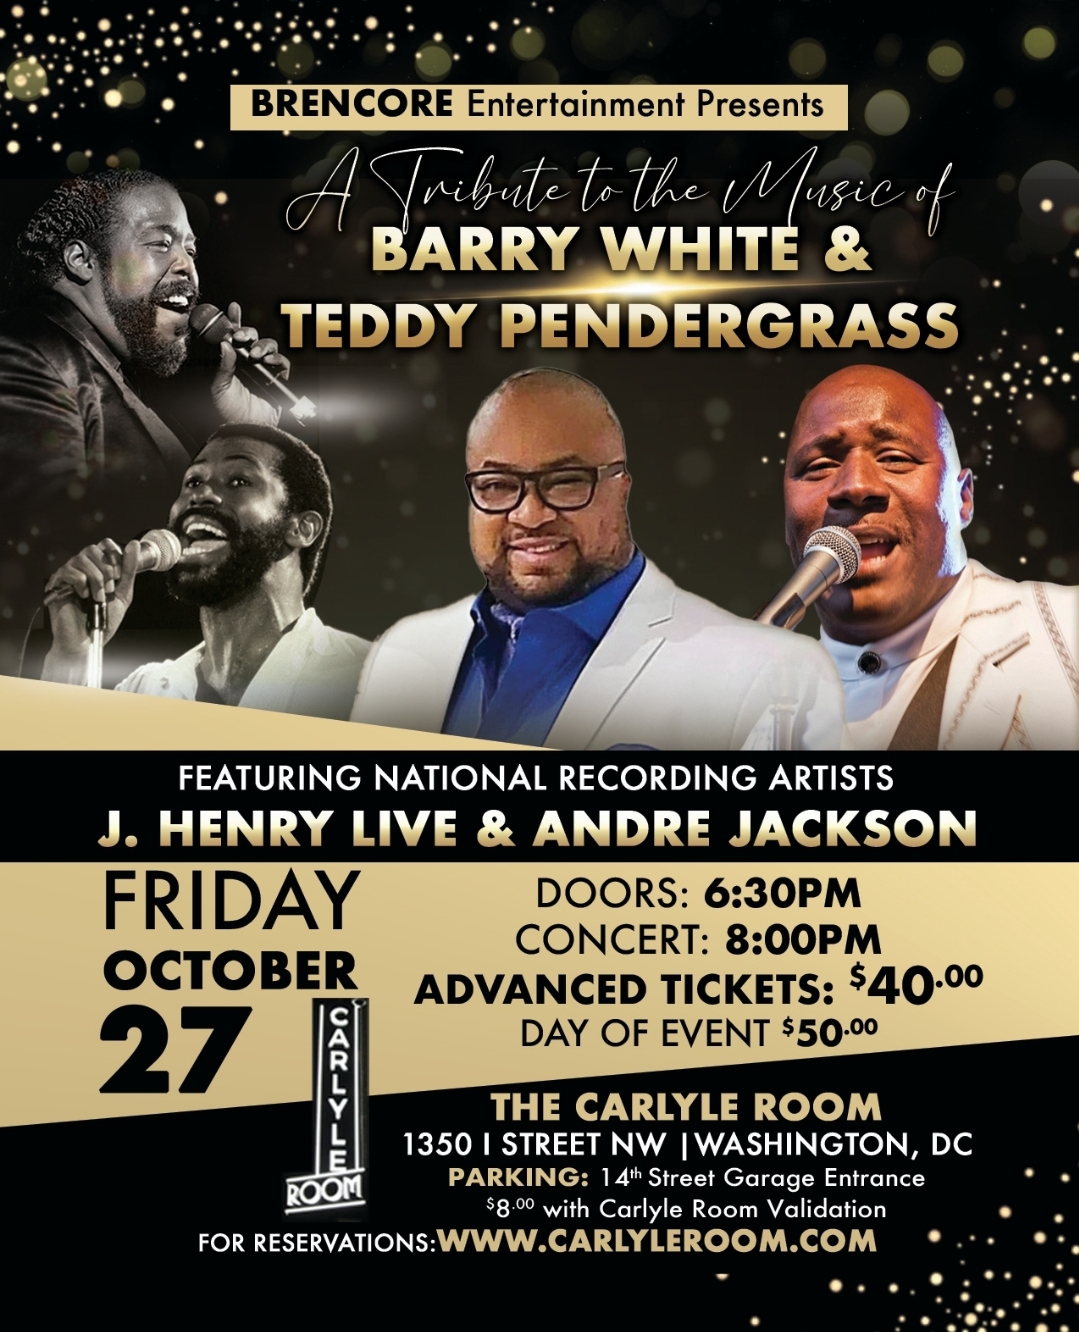 A Tribute to the Music of Teddy Pendergrass and Barry White